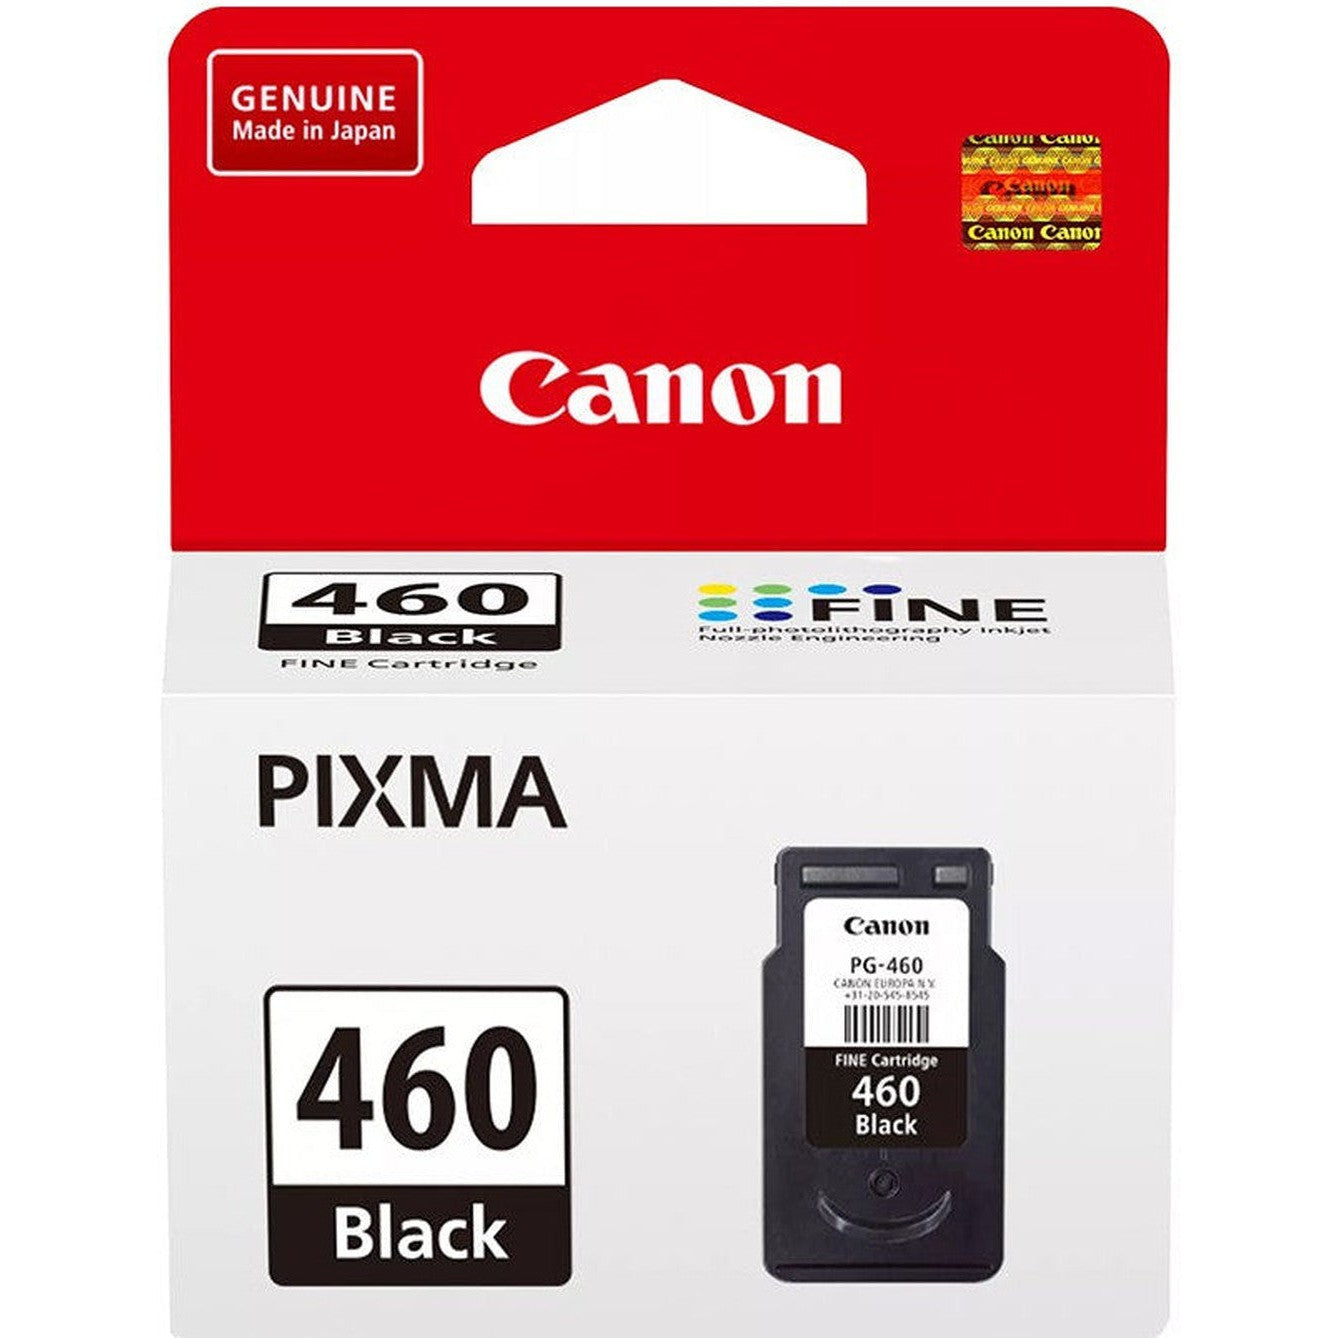 Canon Pg 460 Black Ink Cartridge (3711C001)-Inks And Toners-Canon-Star Light Kuwait